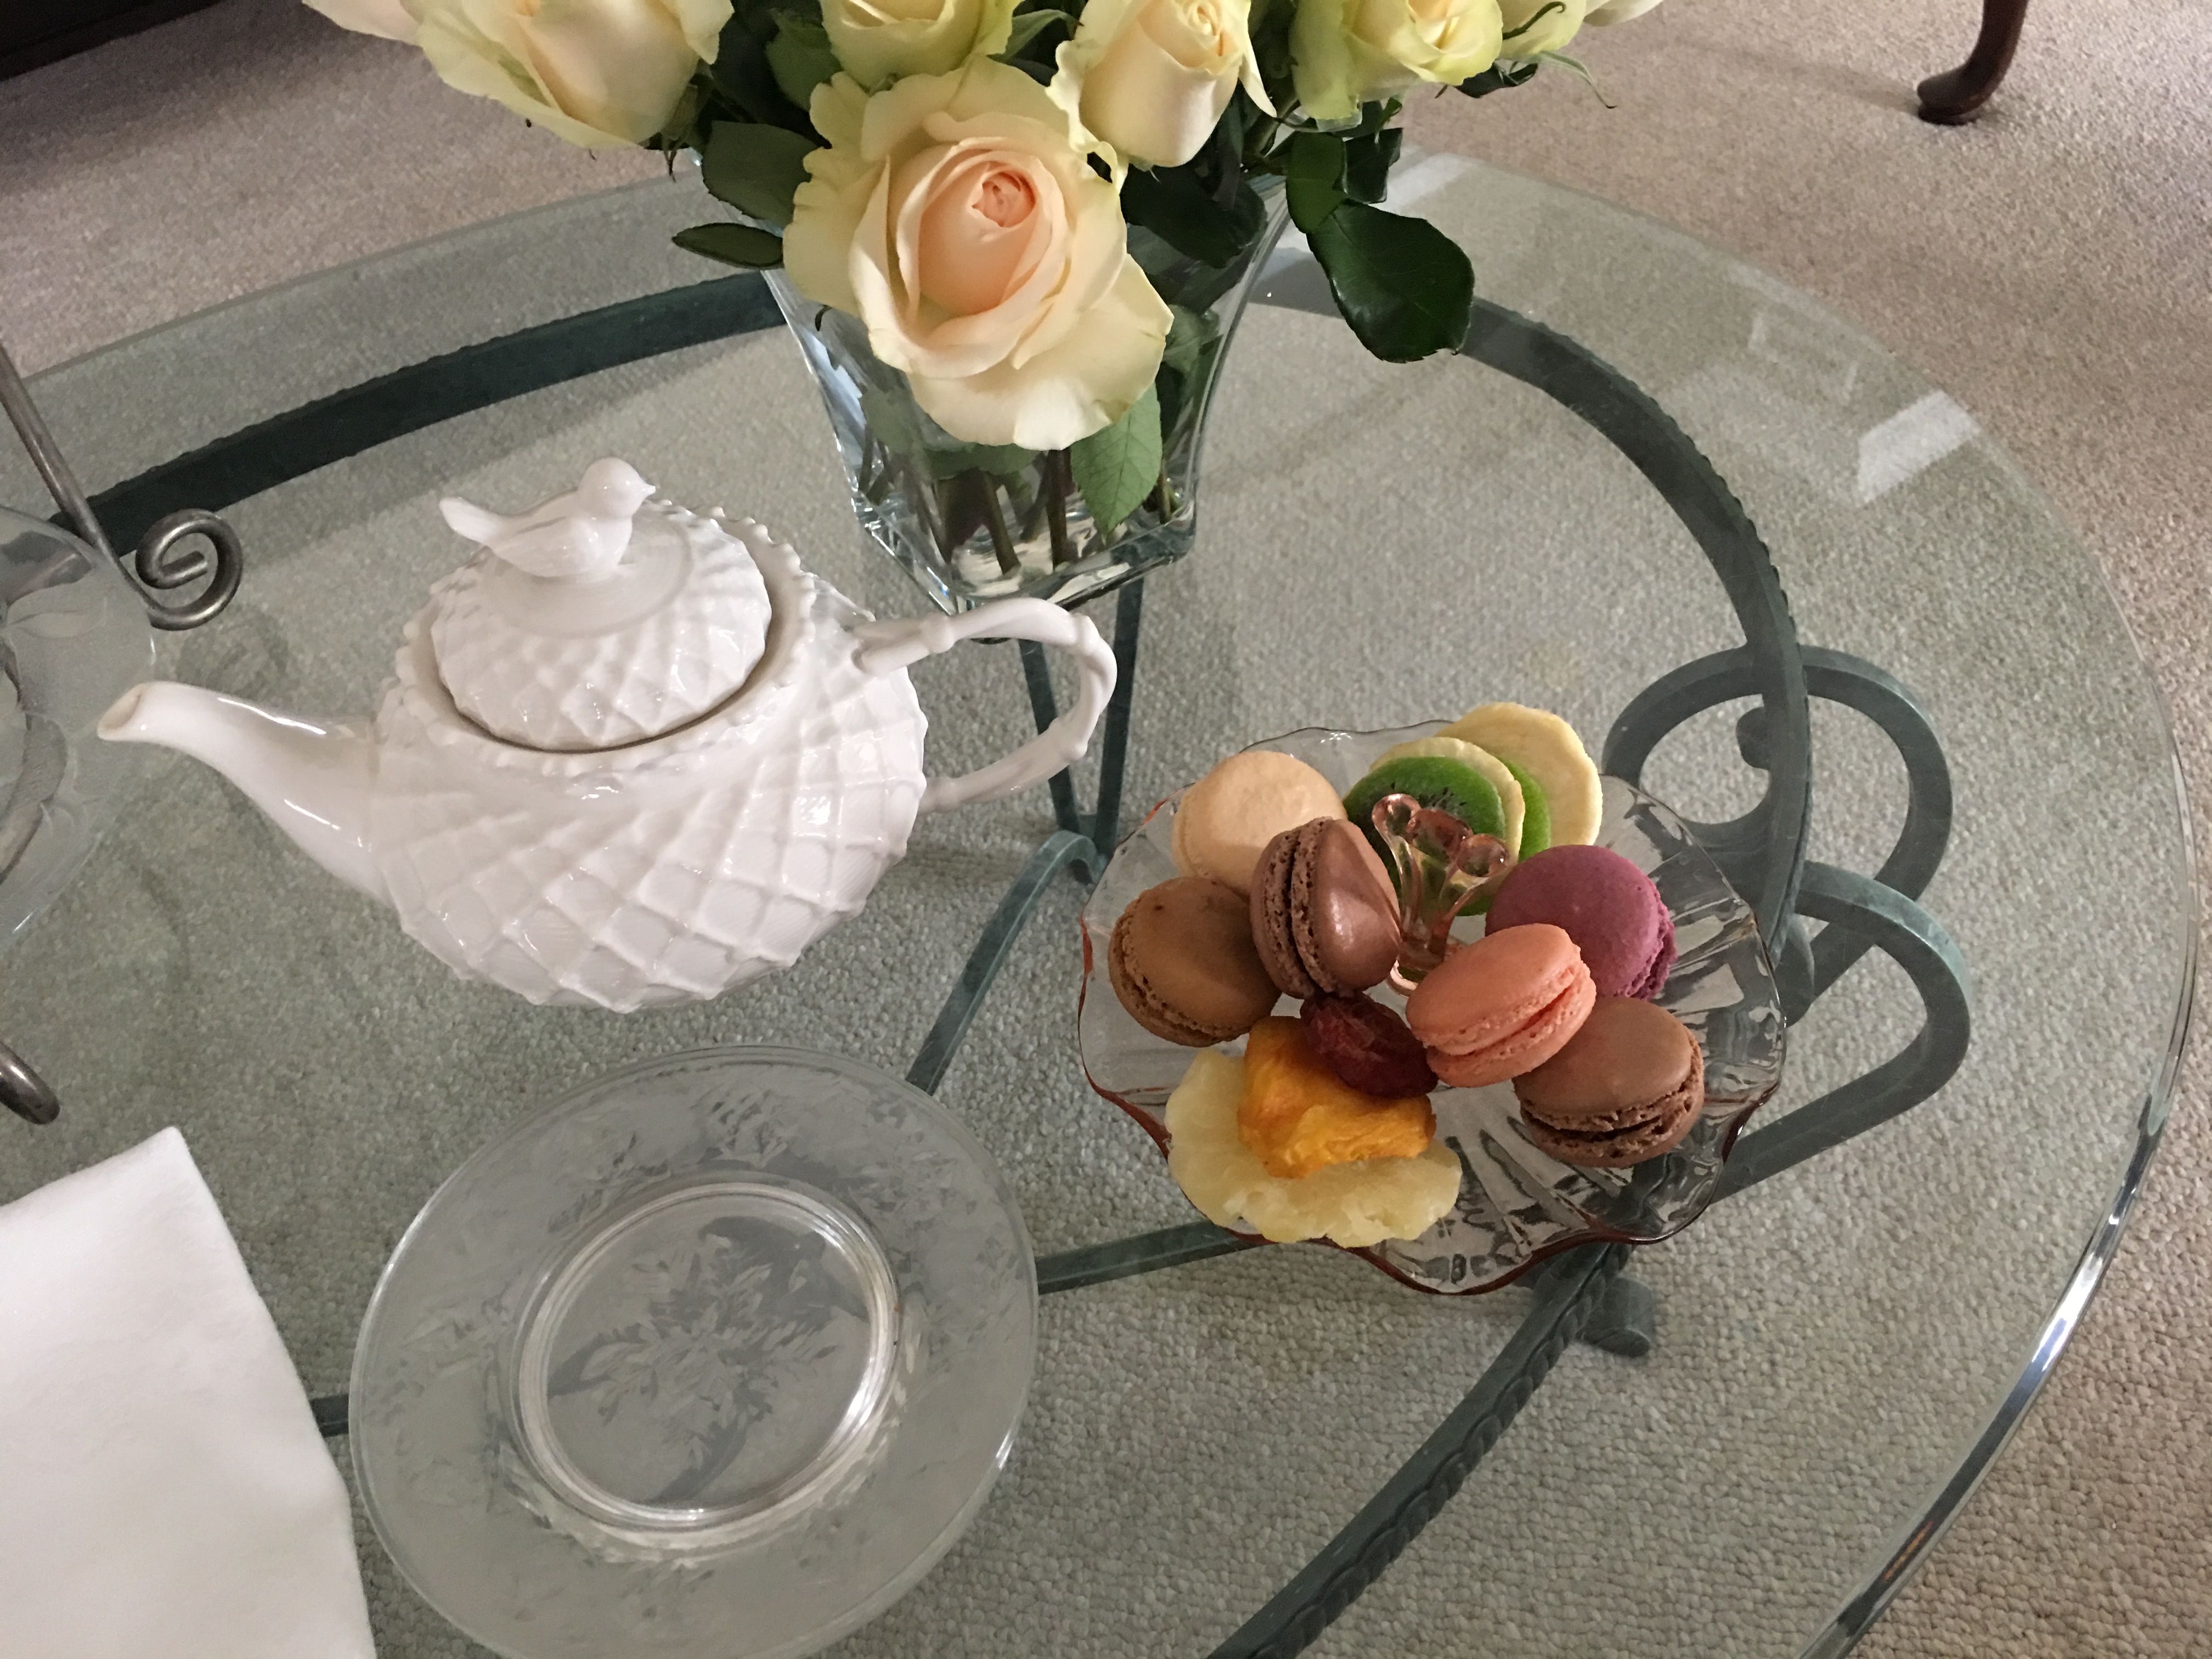 Glass table with white teapot, plate of macarons and vase of flowers